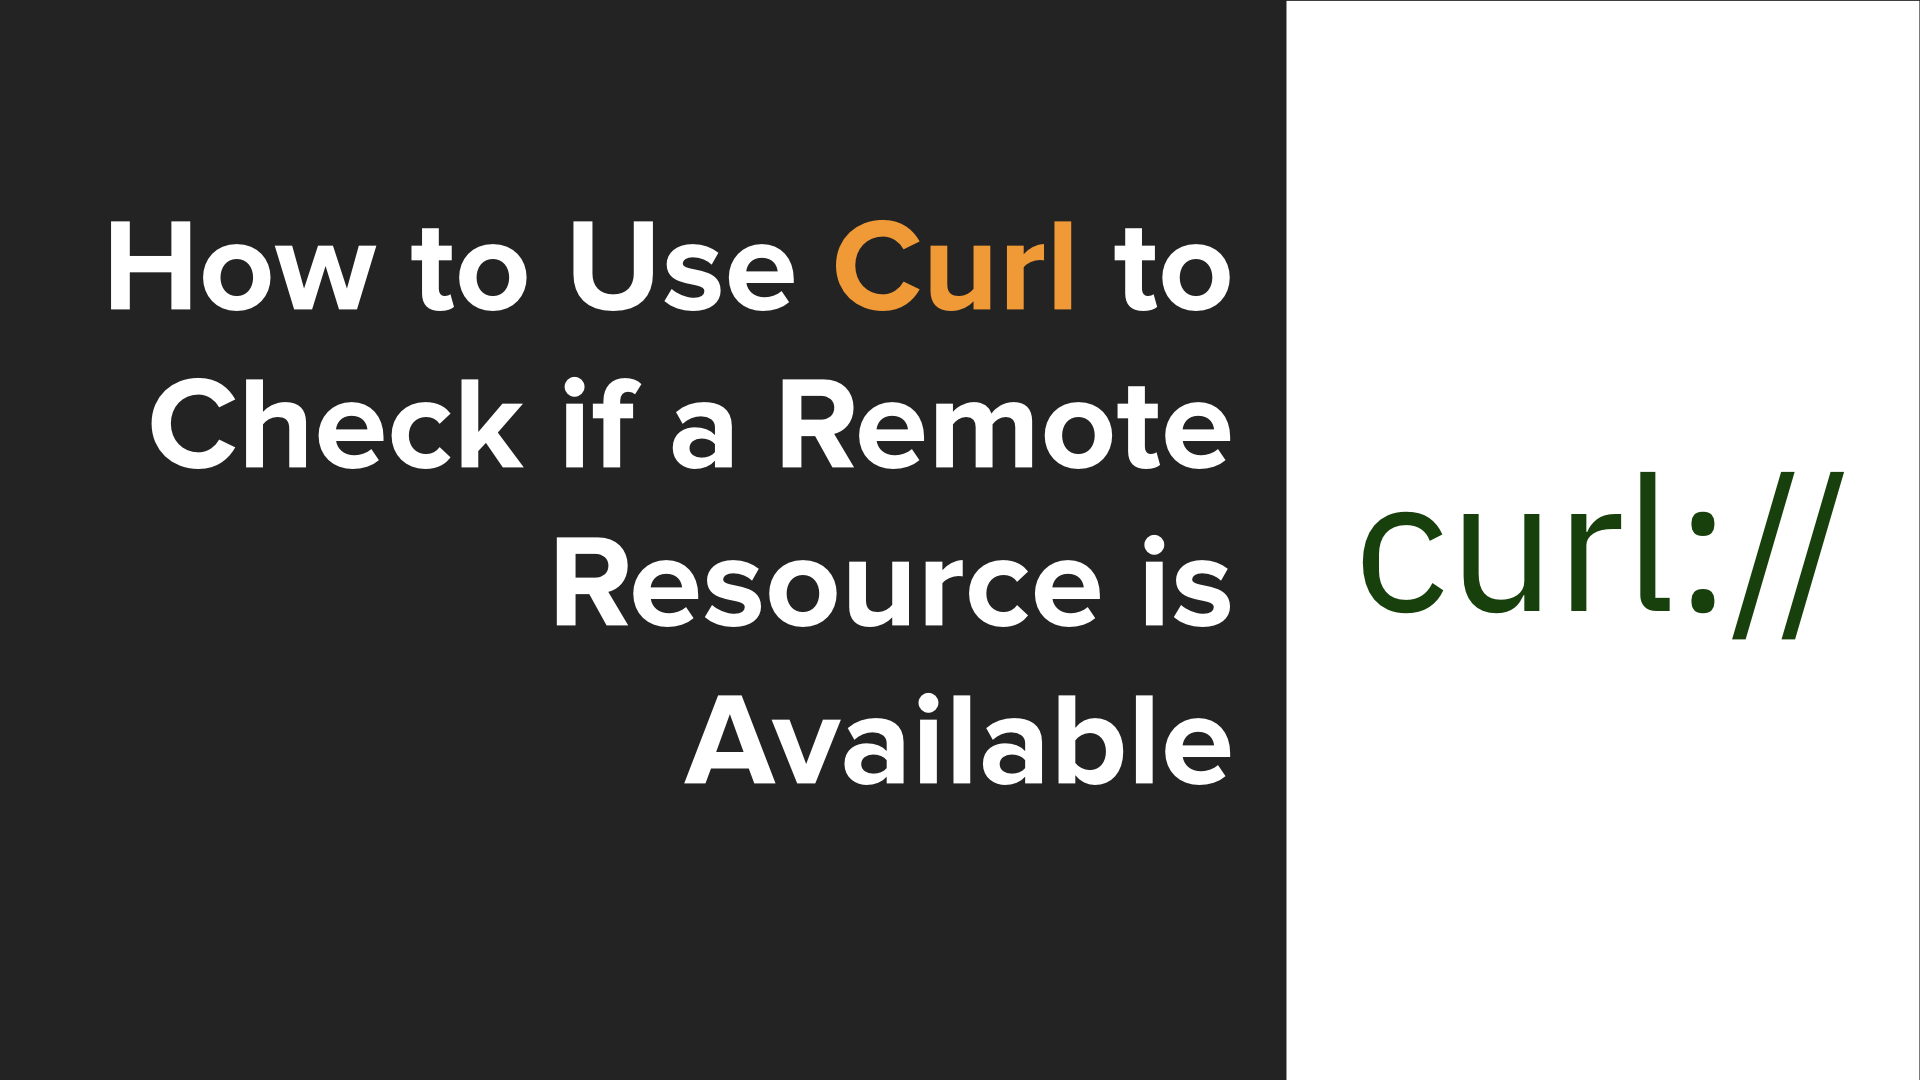 How to Use Curl to Check if a Remote Resource is Available